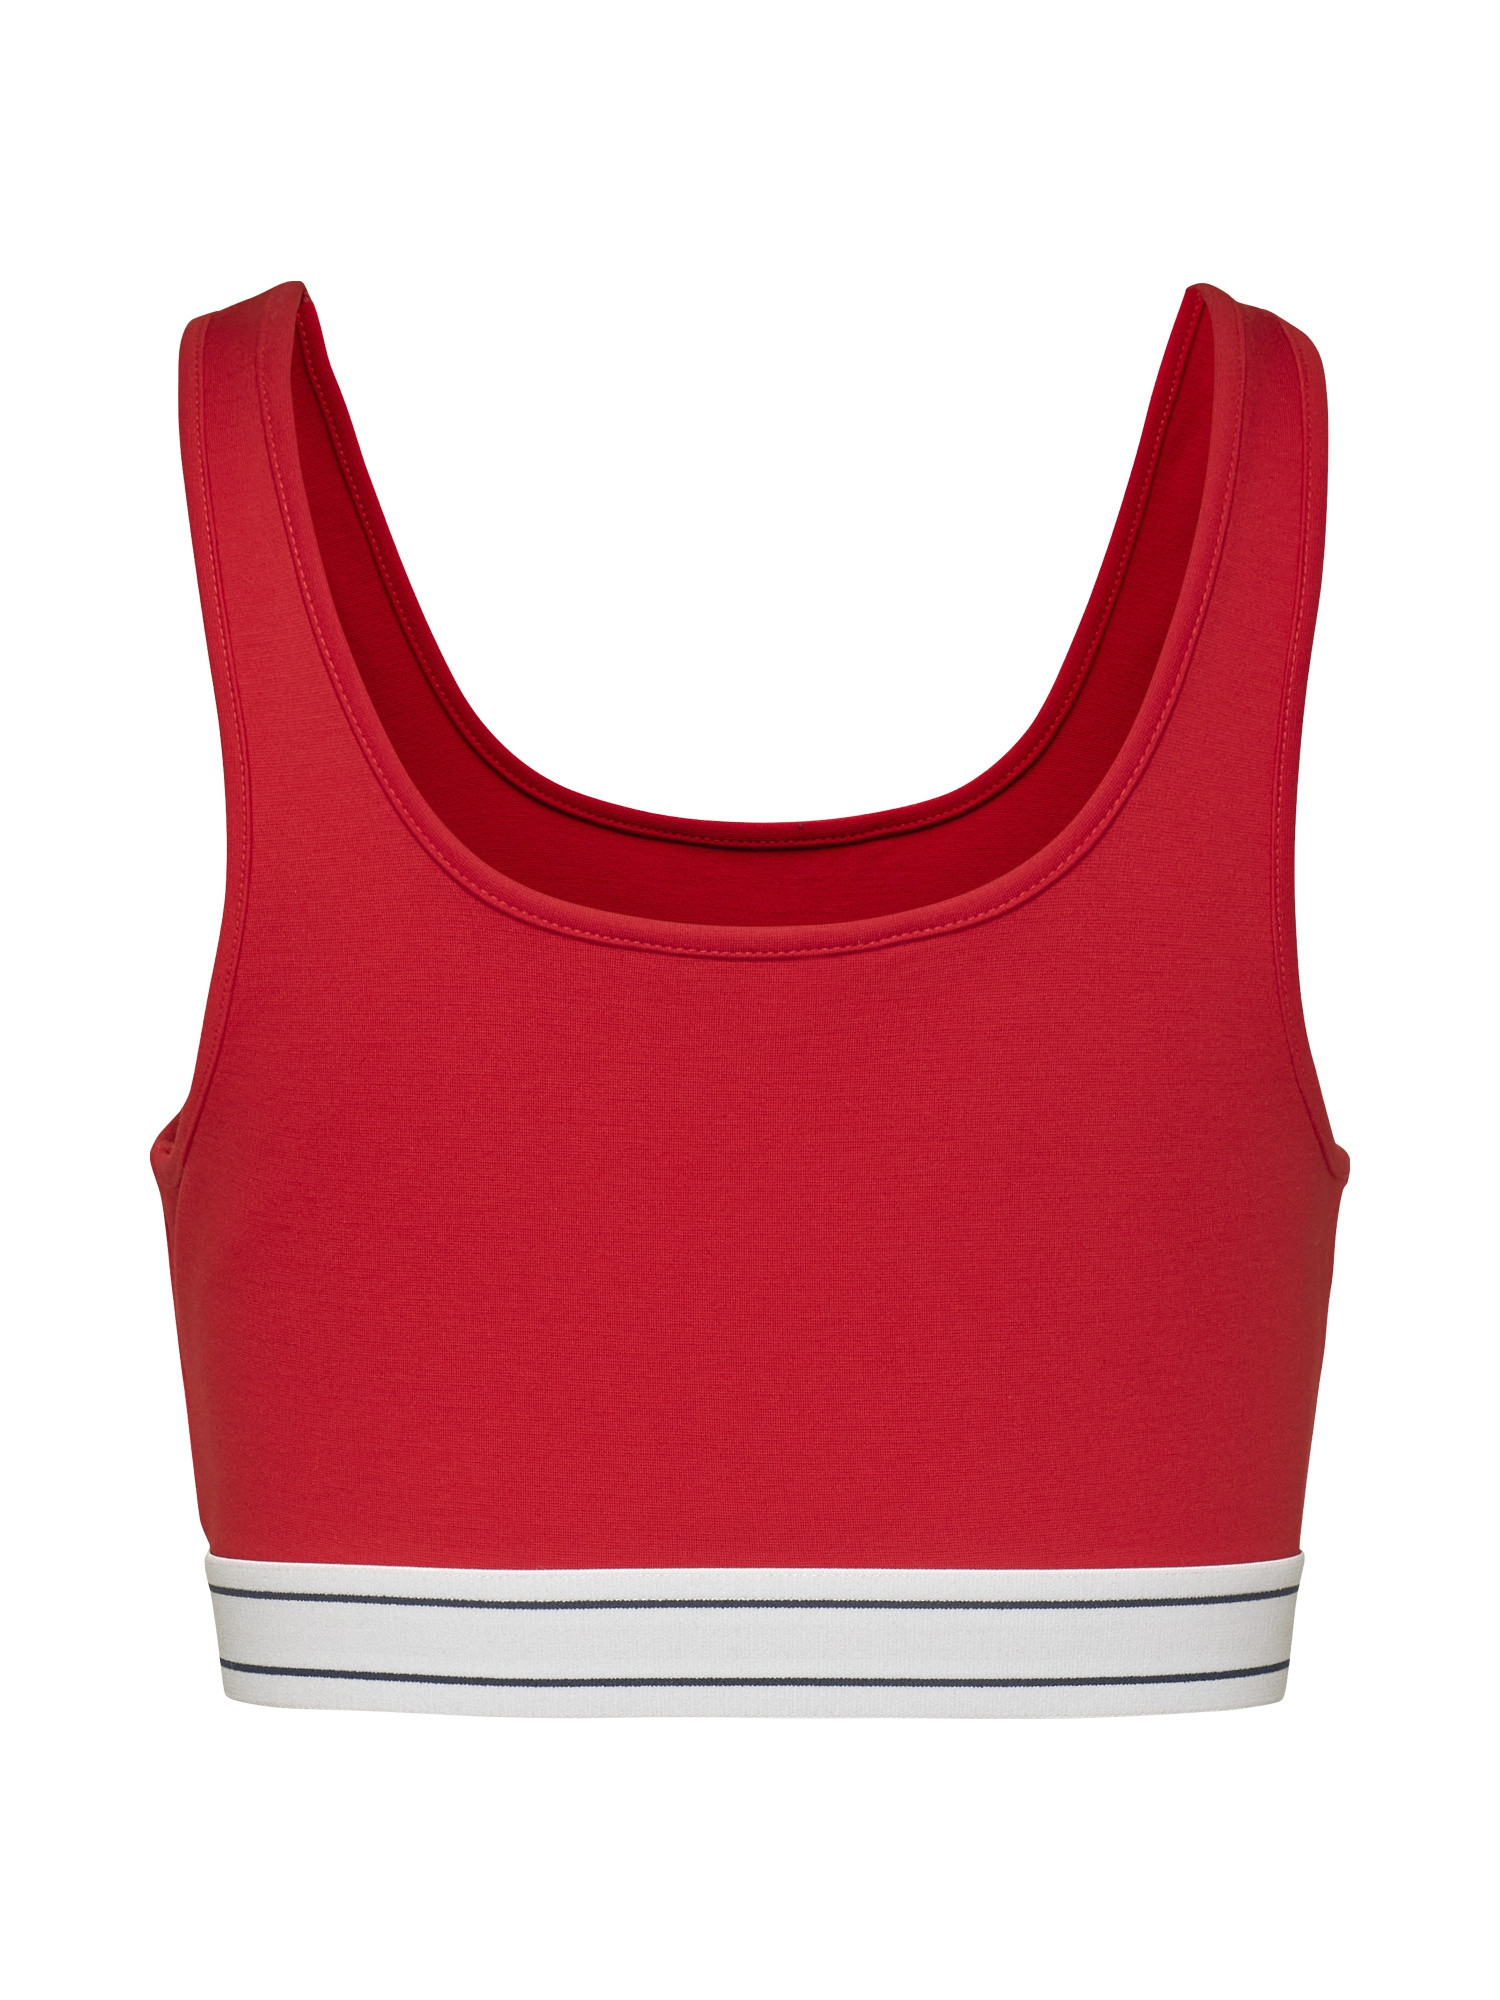 Tommy Jeans - Top sportivo con logo, Rosso, large image number 1